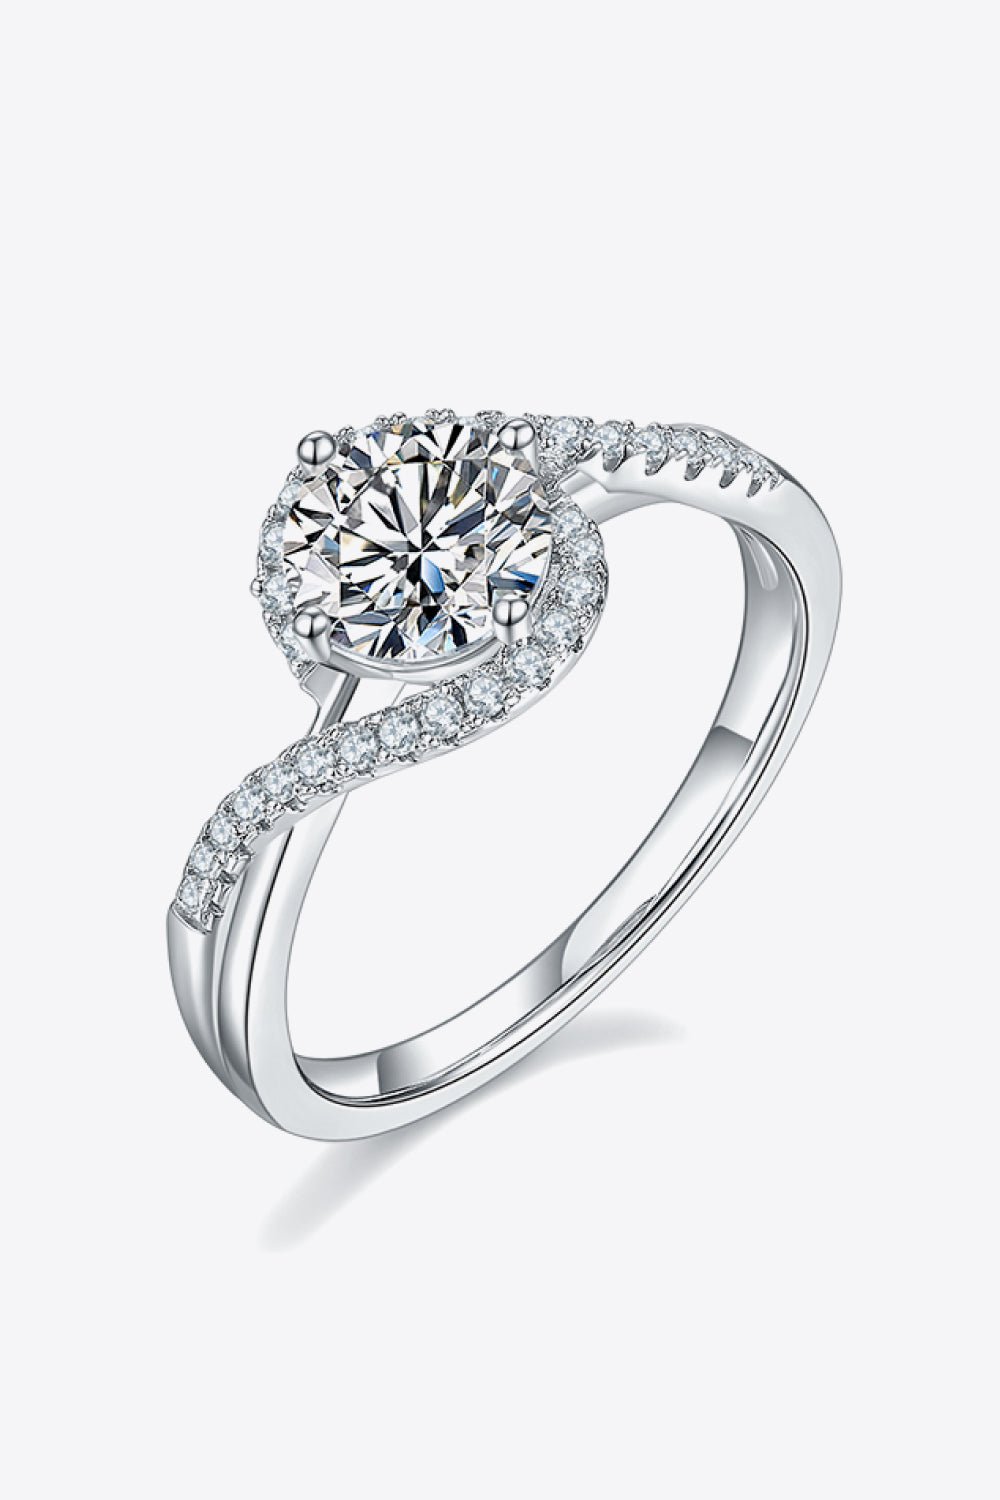 Adored 1 Carat Moissanite 925 Sterling Silver Crisscross Ring - Kings Crown Jewel Boutique